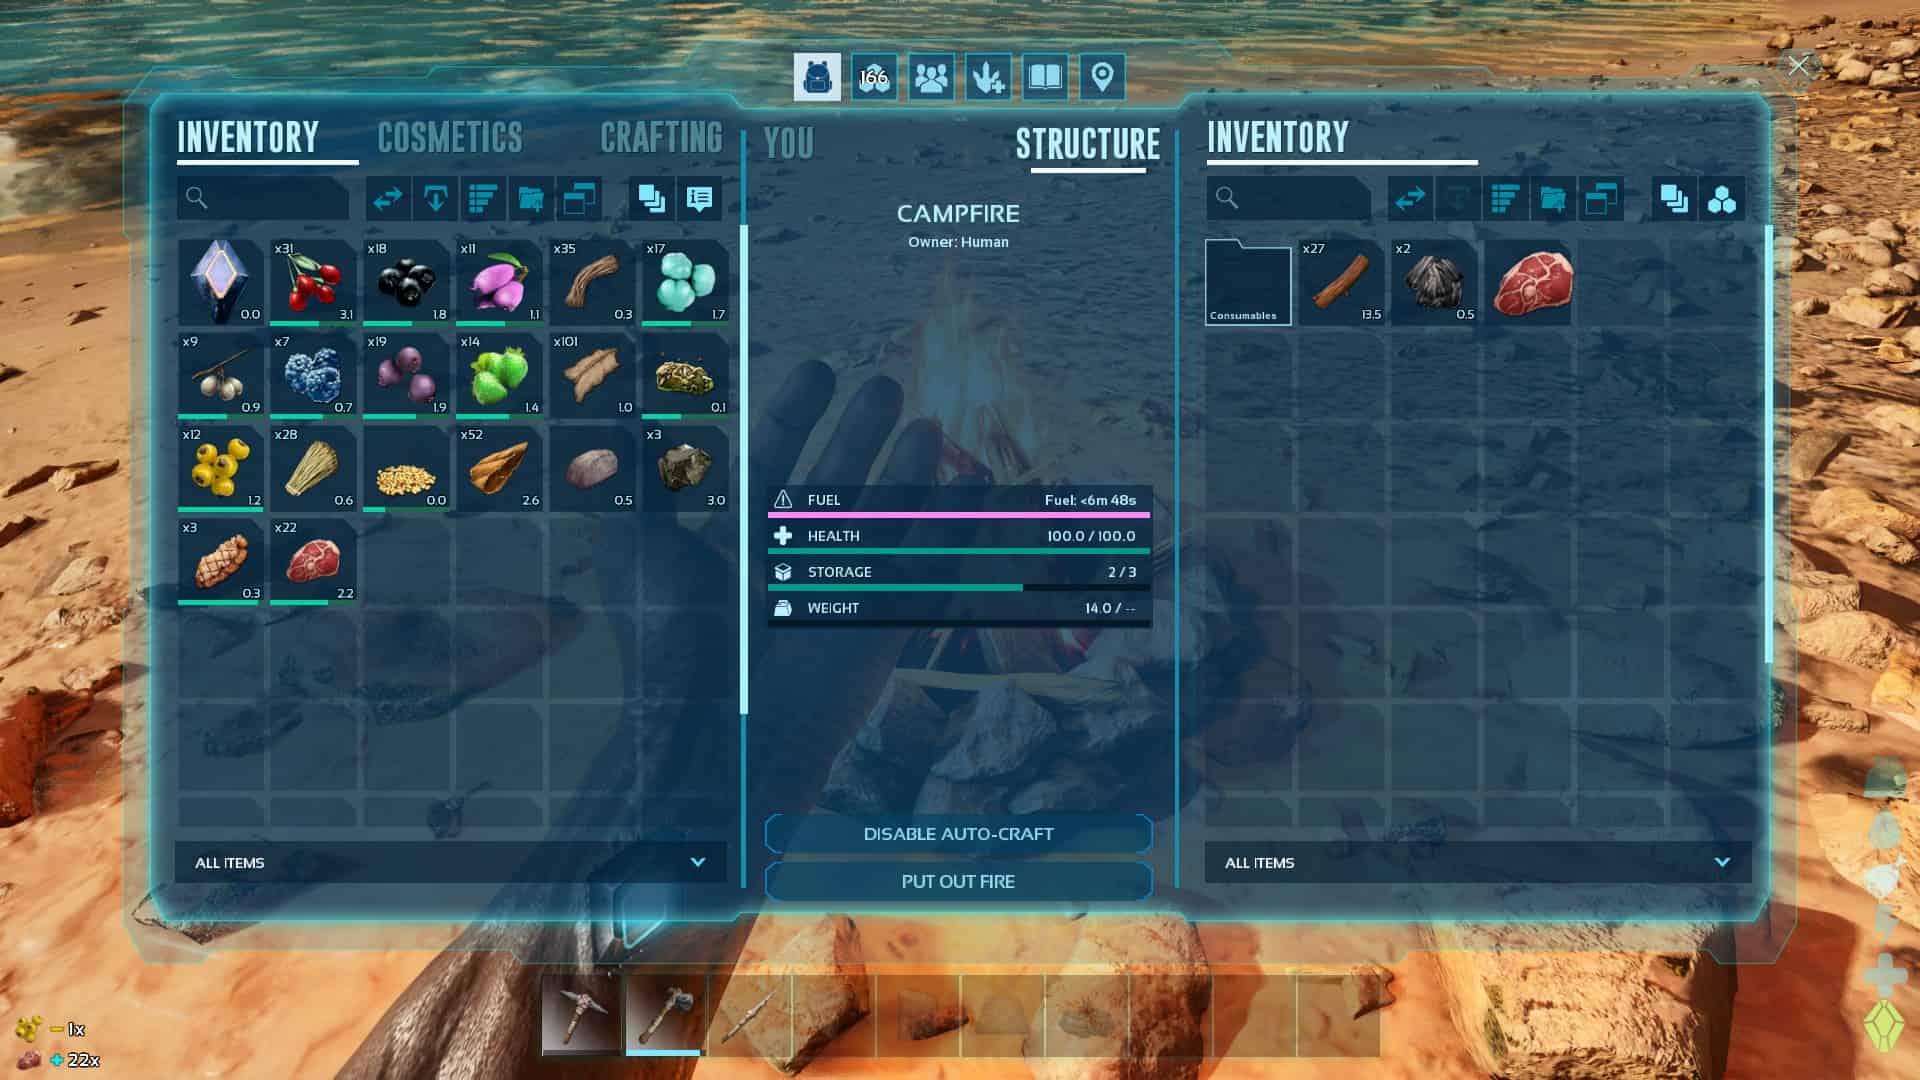 ARK Survival Ascended how to cook meat: Placing raw meat in the inventory of a campfire.